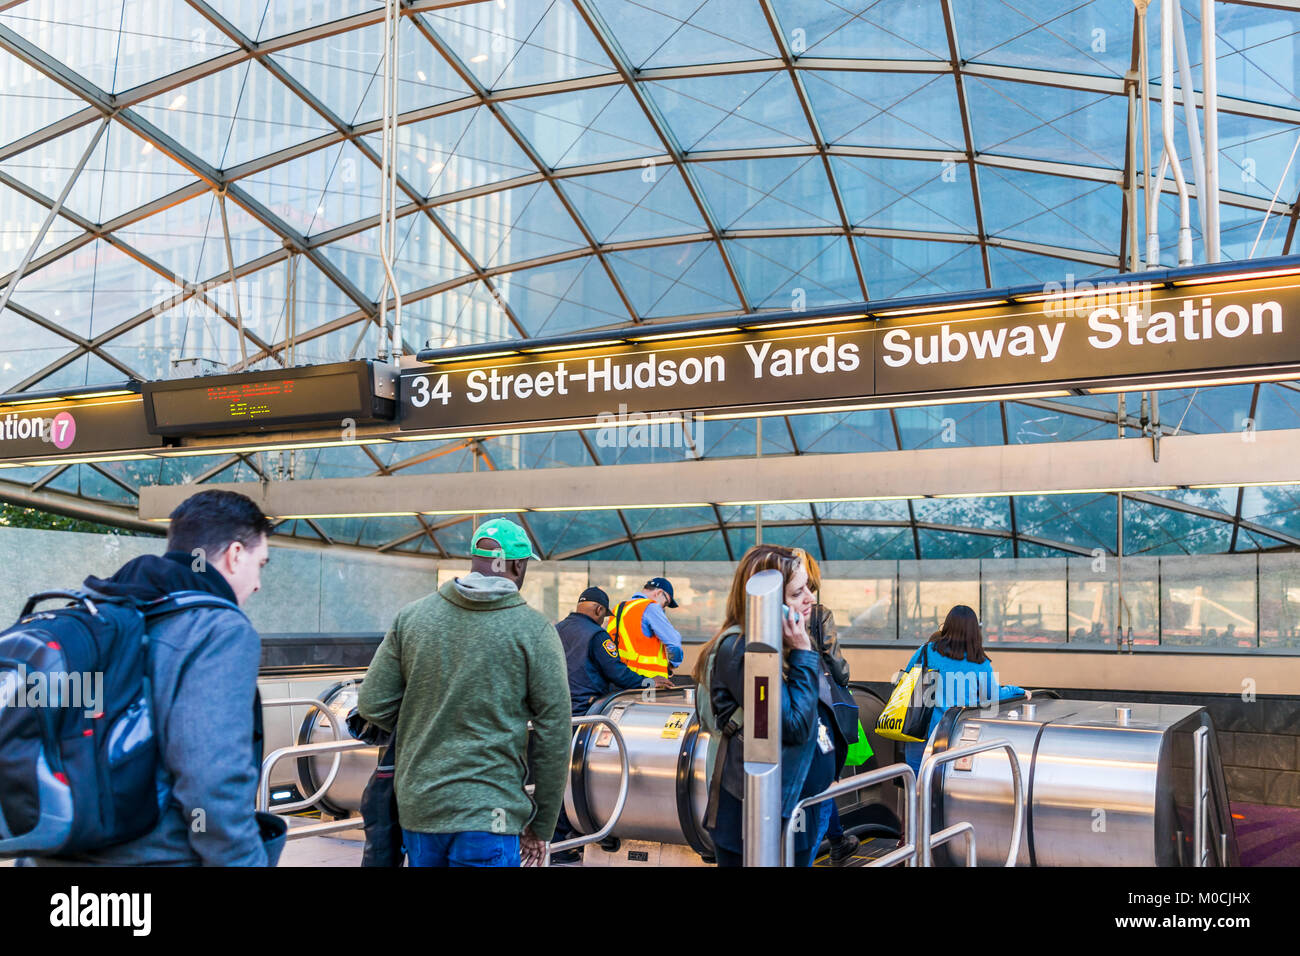 New York City, USA - October 27, 2017: People entering transit by sign in NYC Chelsea West Side 34th Street Hudson Yards Subway Station after work on  Stock Photo